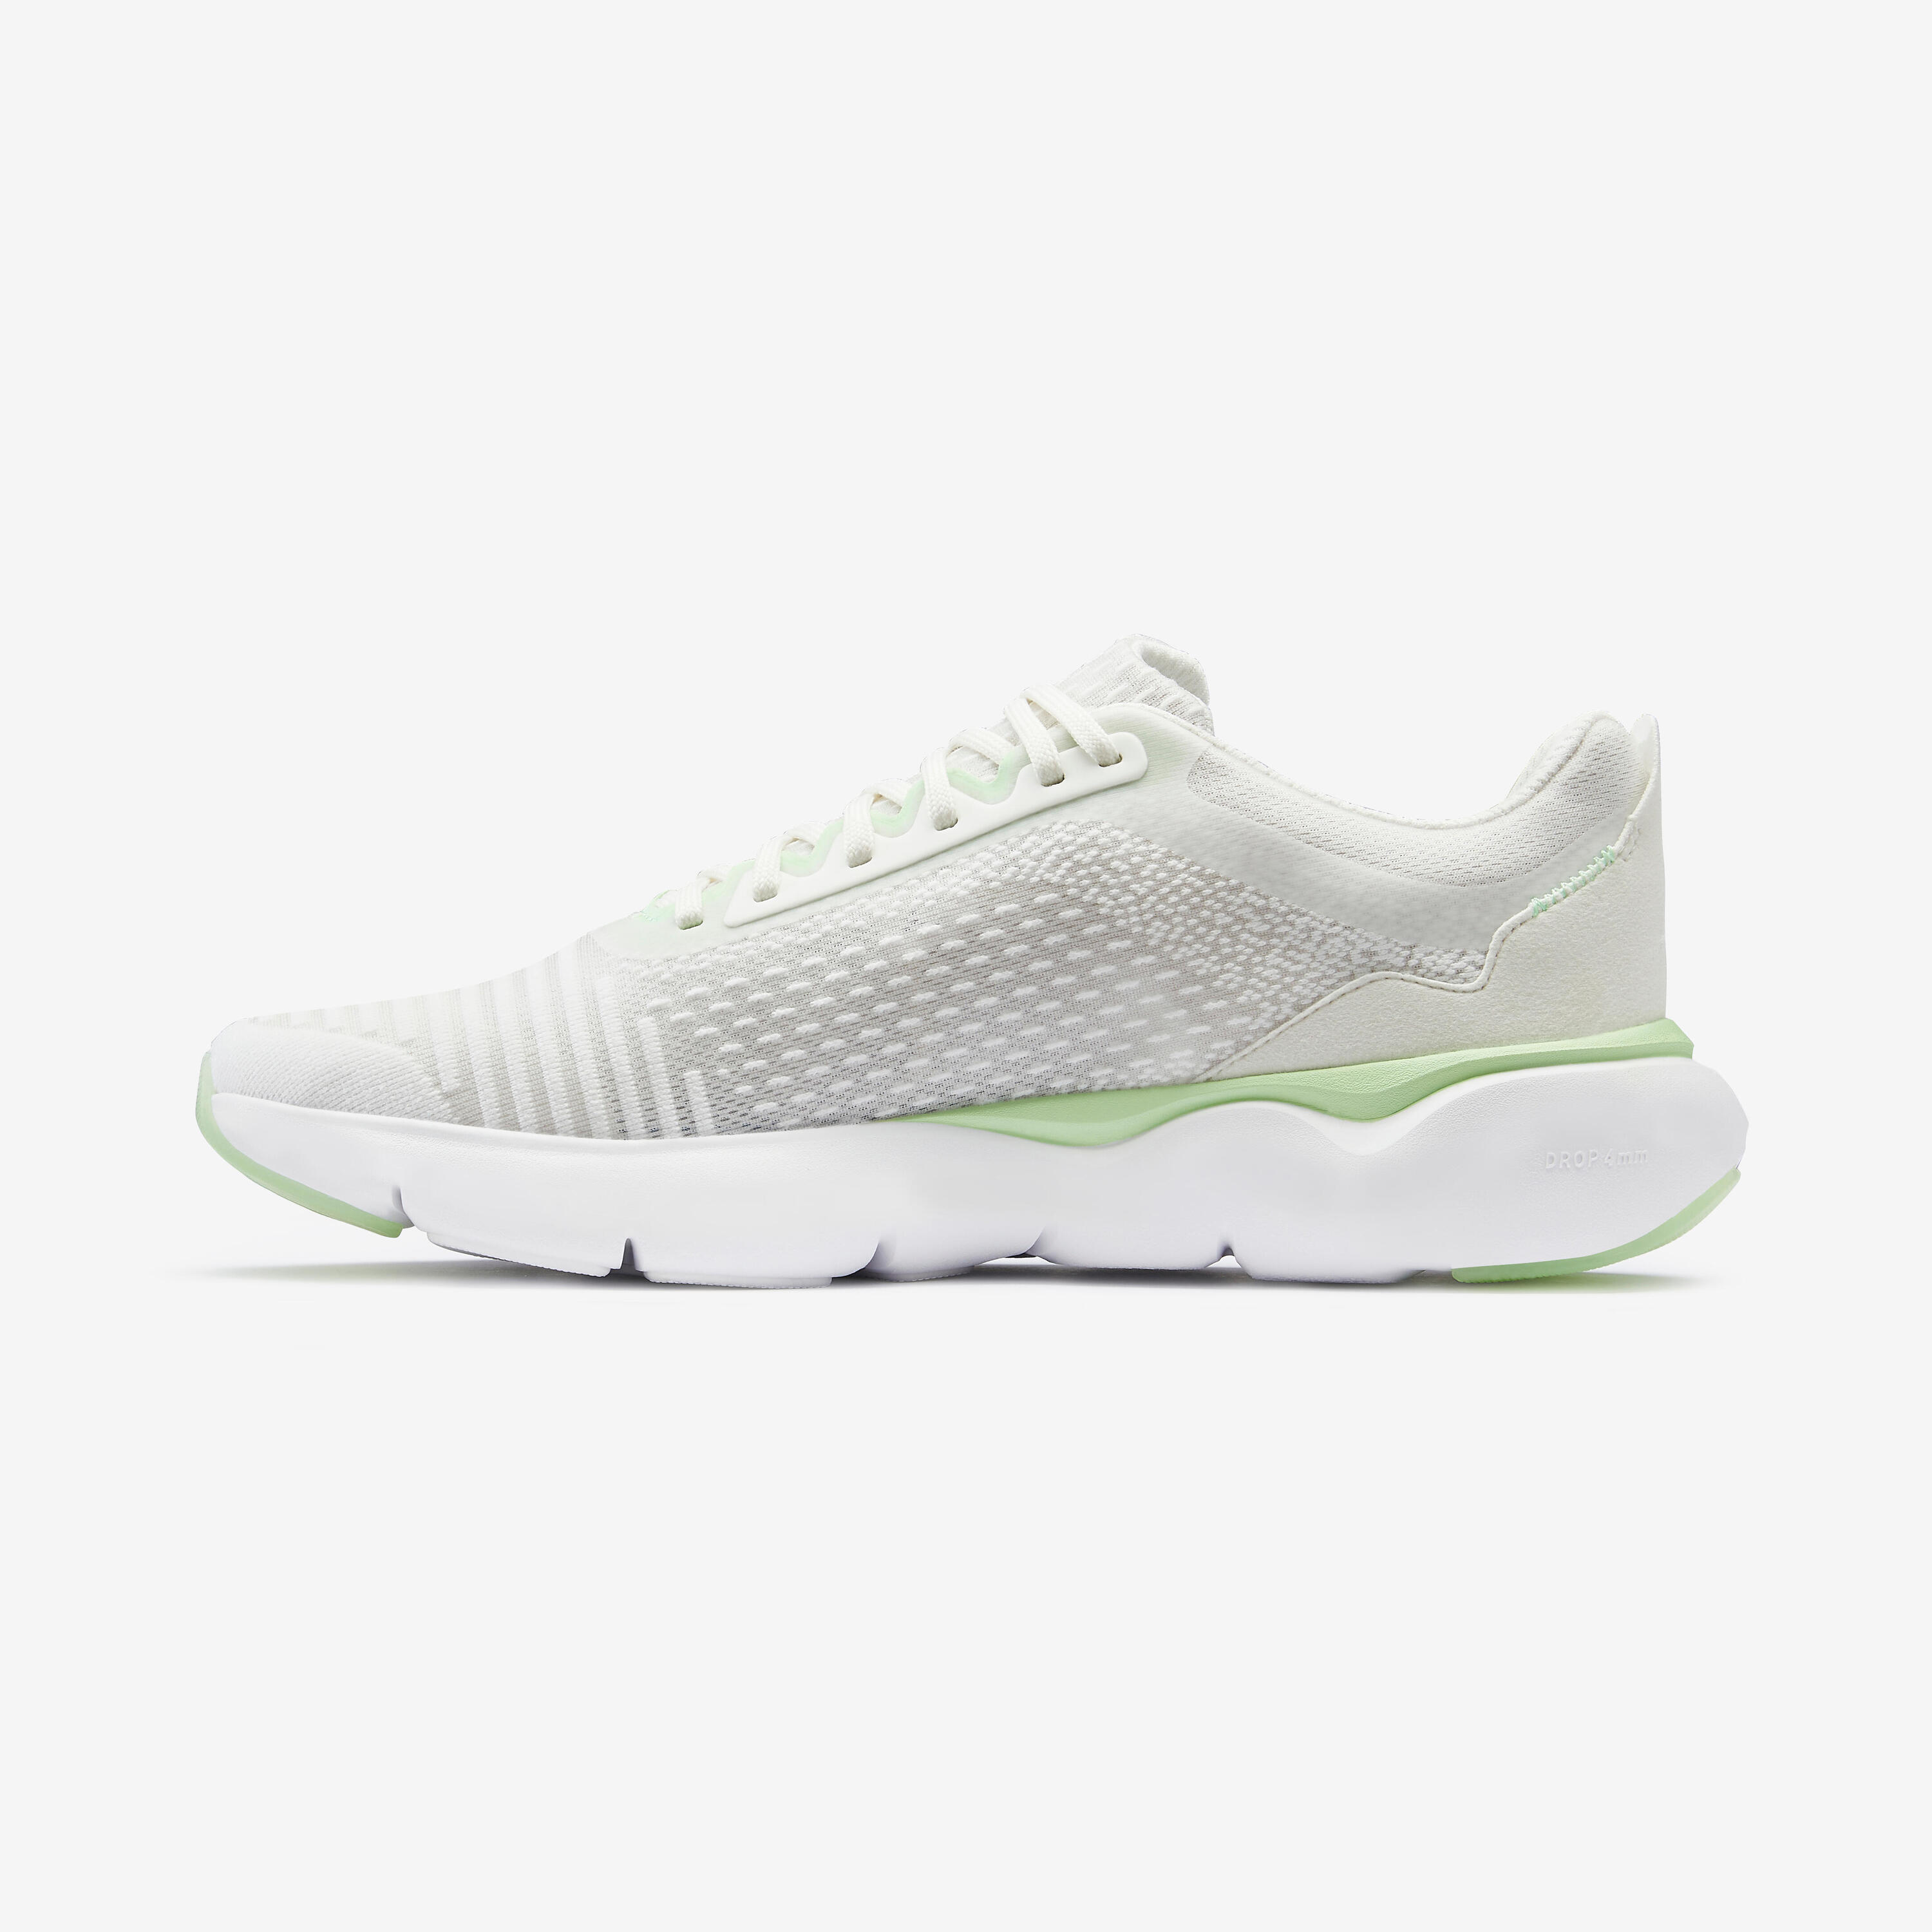 JOGFLOW 500.1 Men's running shoes - Light Green and Off-White 5/13